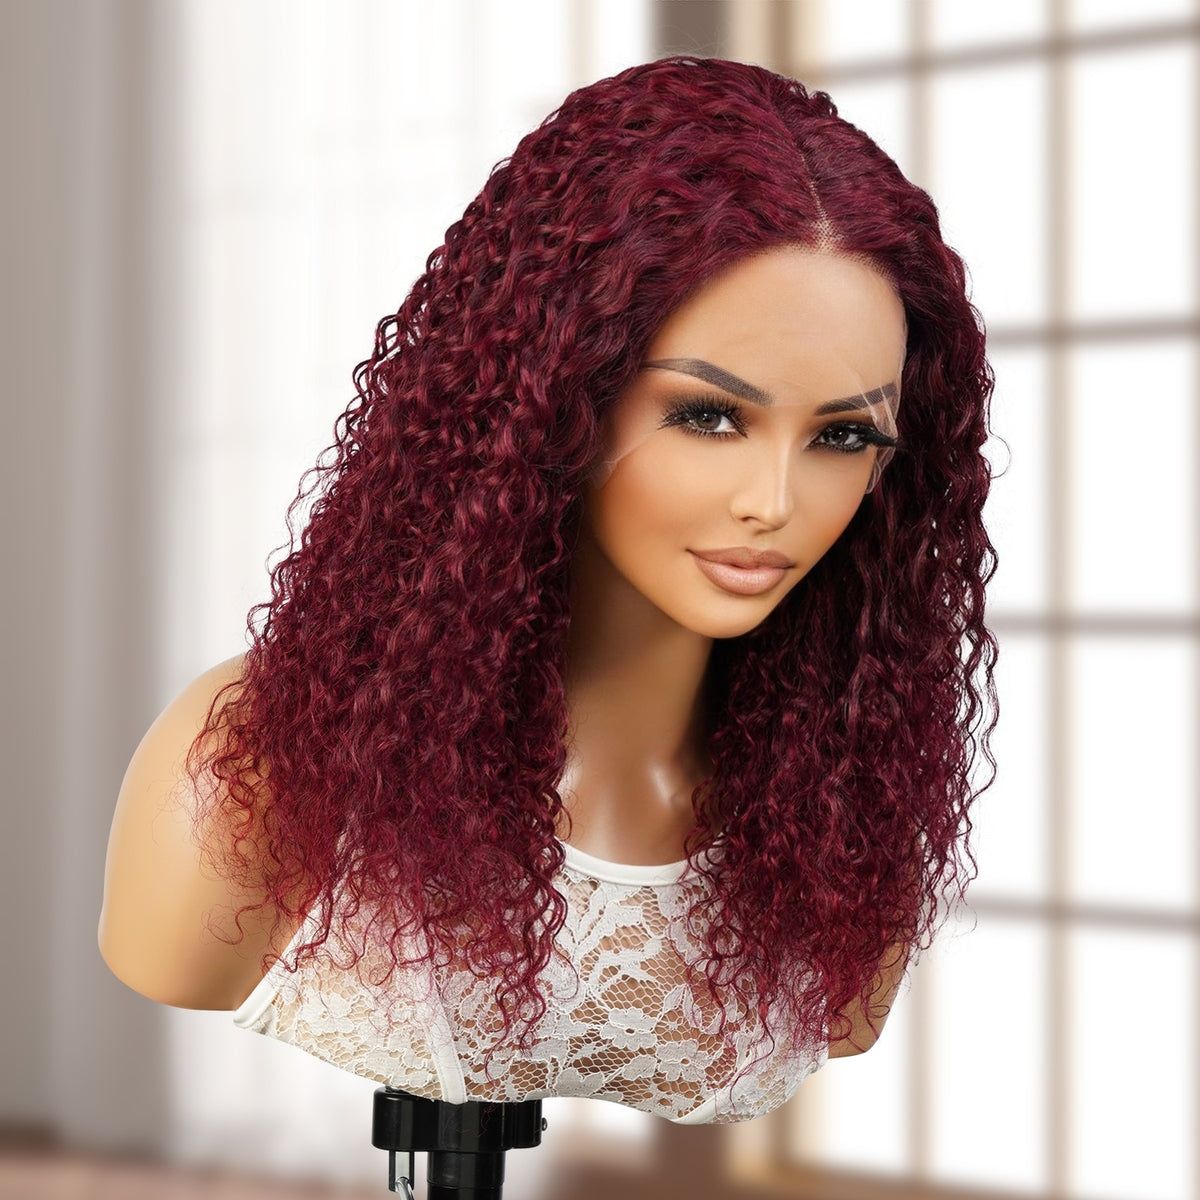 The T part wig is quite versatile and you can style it in as many ways as people do with a lace front wig, It’s wearable right out the box, Most classic reddish color for any occasion, Best vacation hair style, Pre-colored in redwine burgundy, Low maintenance hairstyle